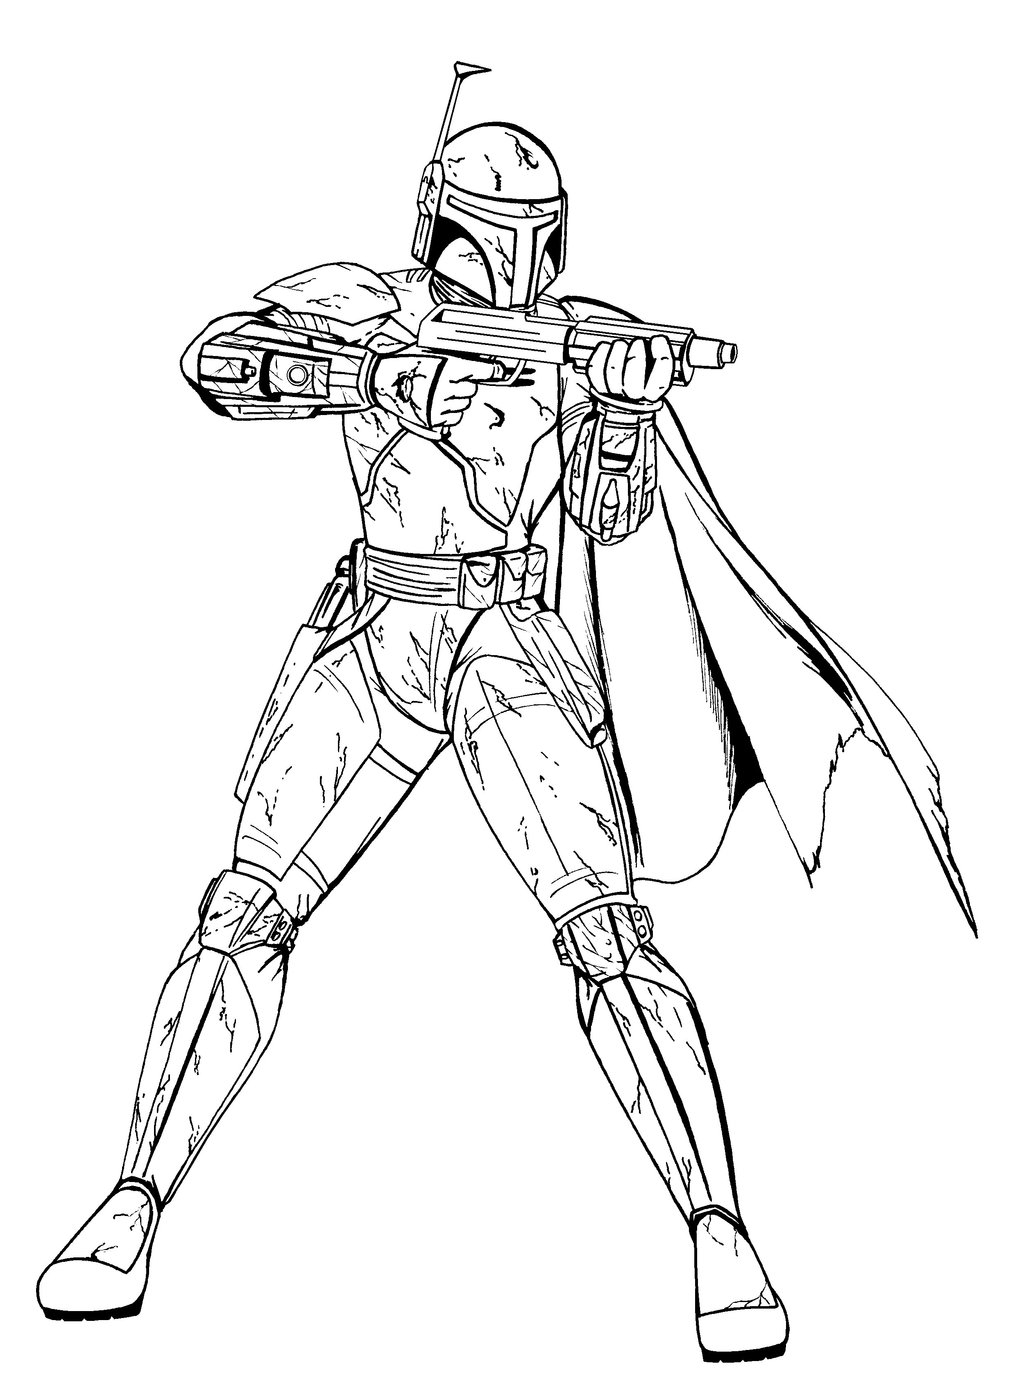 Boba Fett Coloring Page Boba Fett Coloring Pages Download Free Printable Coloring Pages